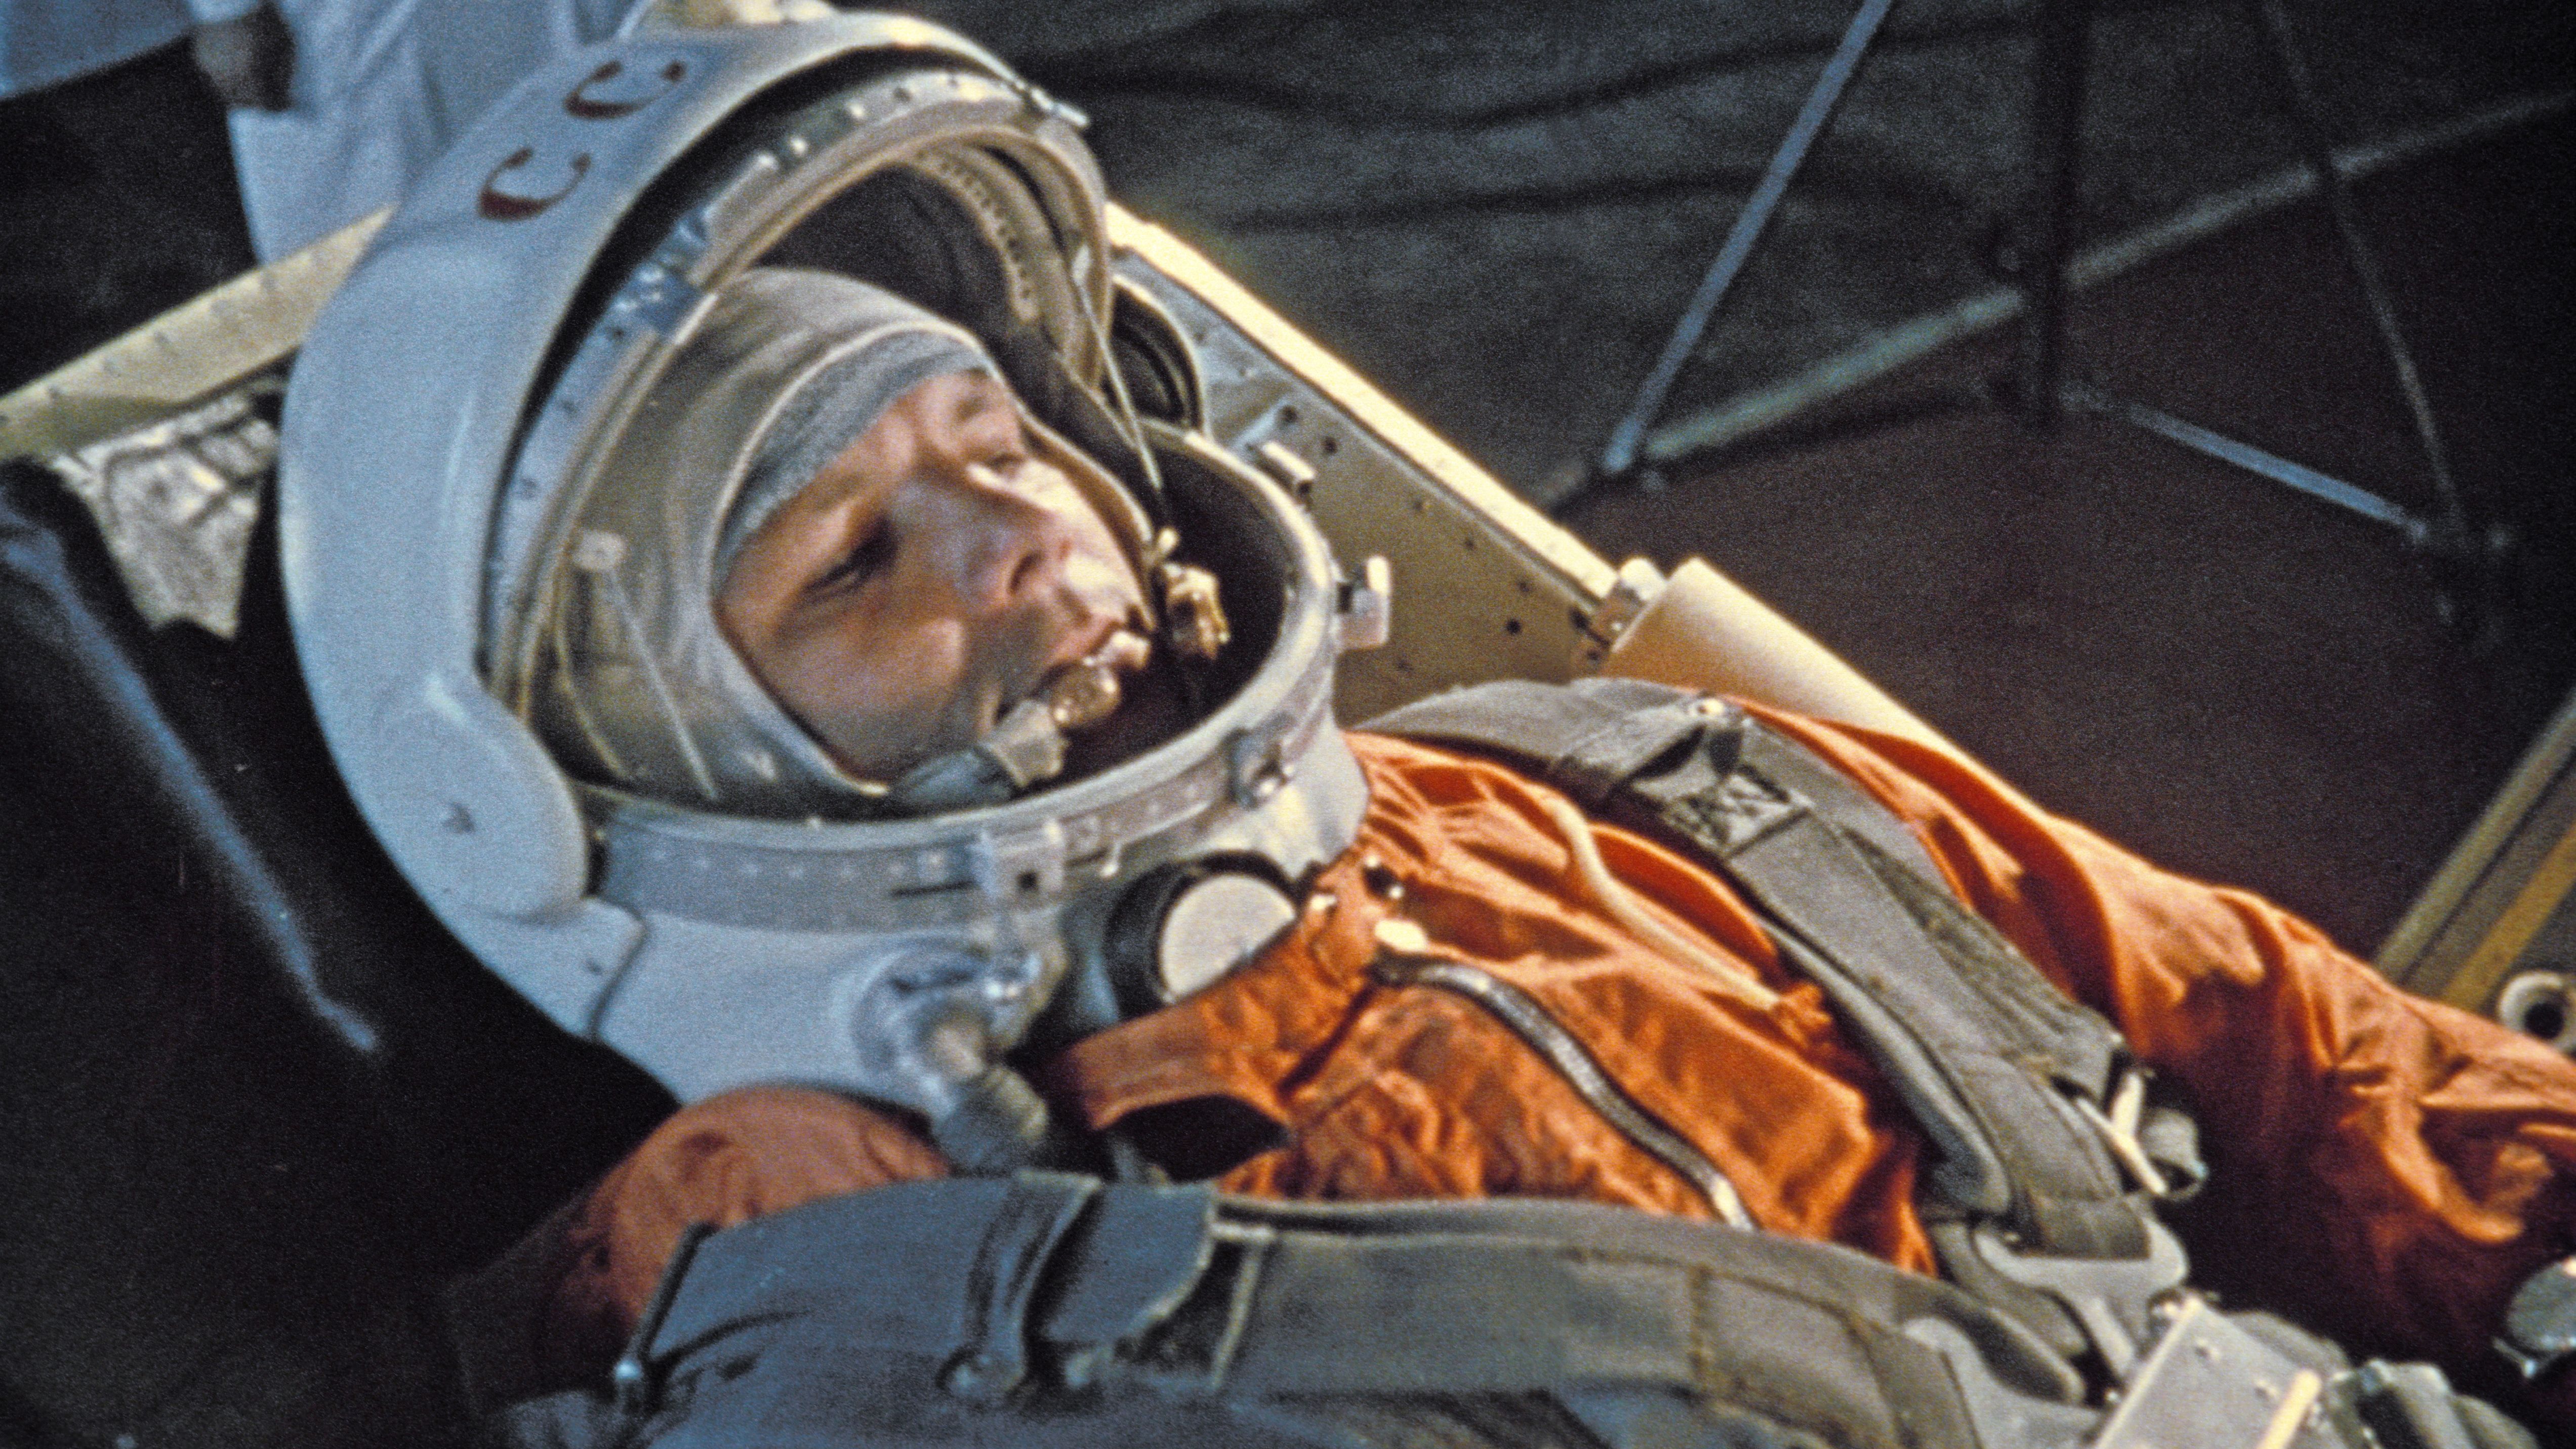 Cosmonaut Yuri Gagarin, the first human to fly into space, was launched in a Vostok 1 space capsule on April 12, 1961. He spent 108 minutes orbiting the Earth before parachuting back to firm ground.